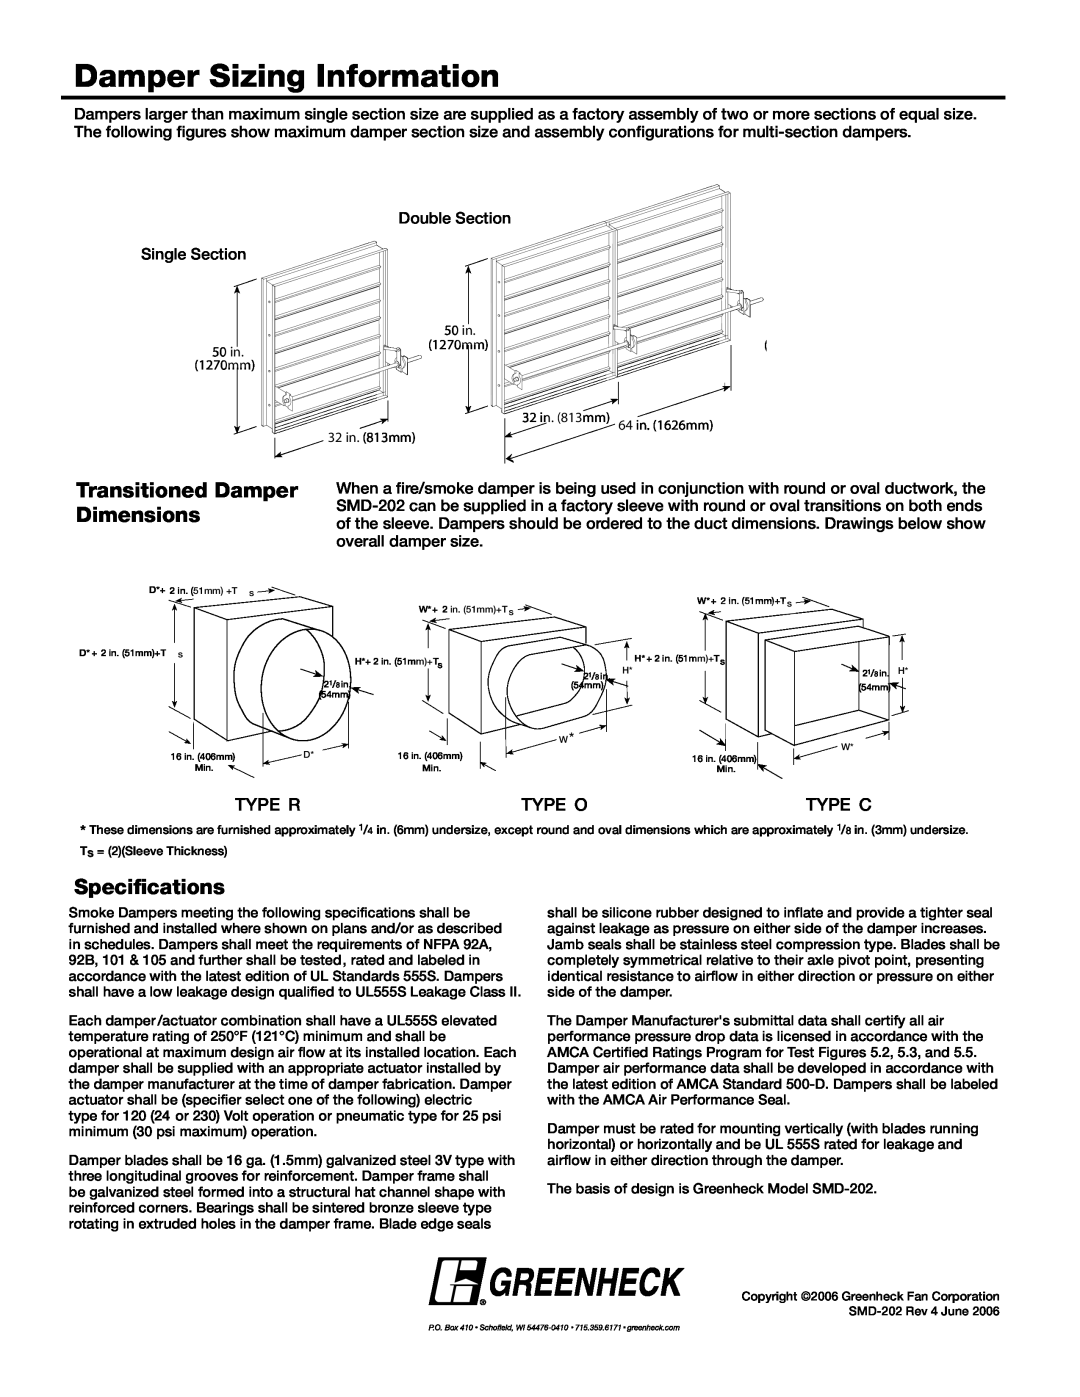 Greenheck Fan SMD-202 dimensions Damper Sizing Information, Transitioned Damper Dimensions, Specifications 